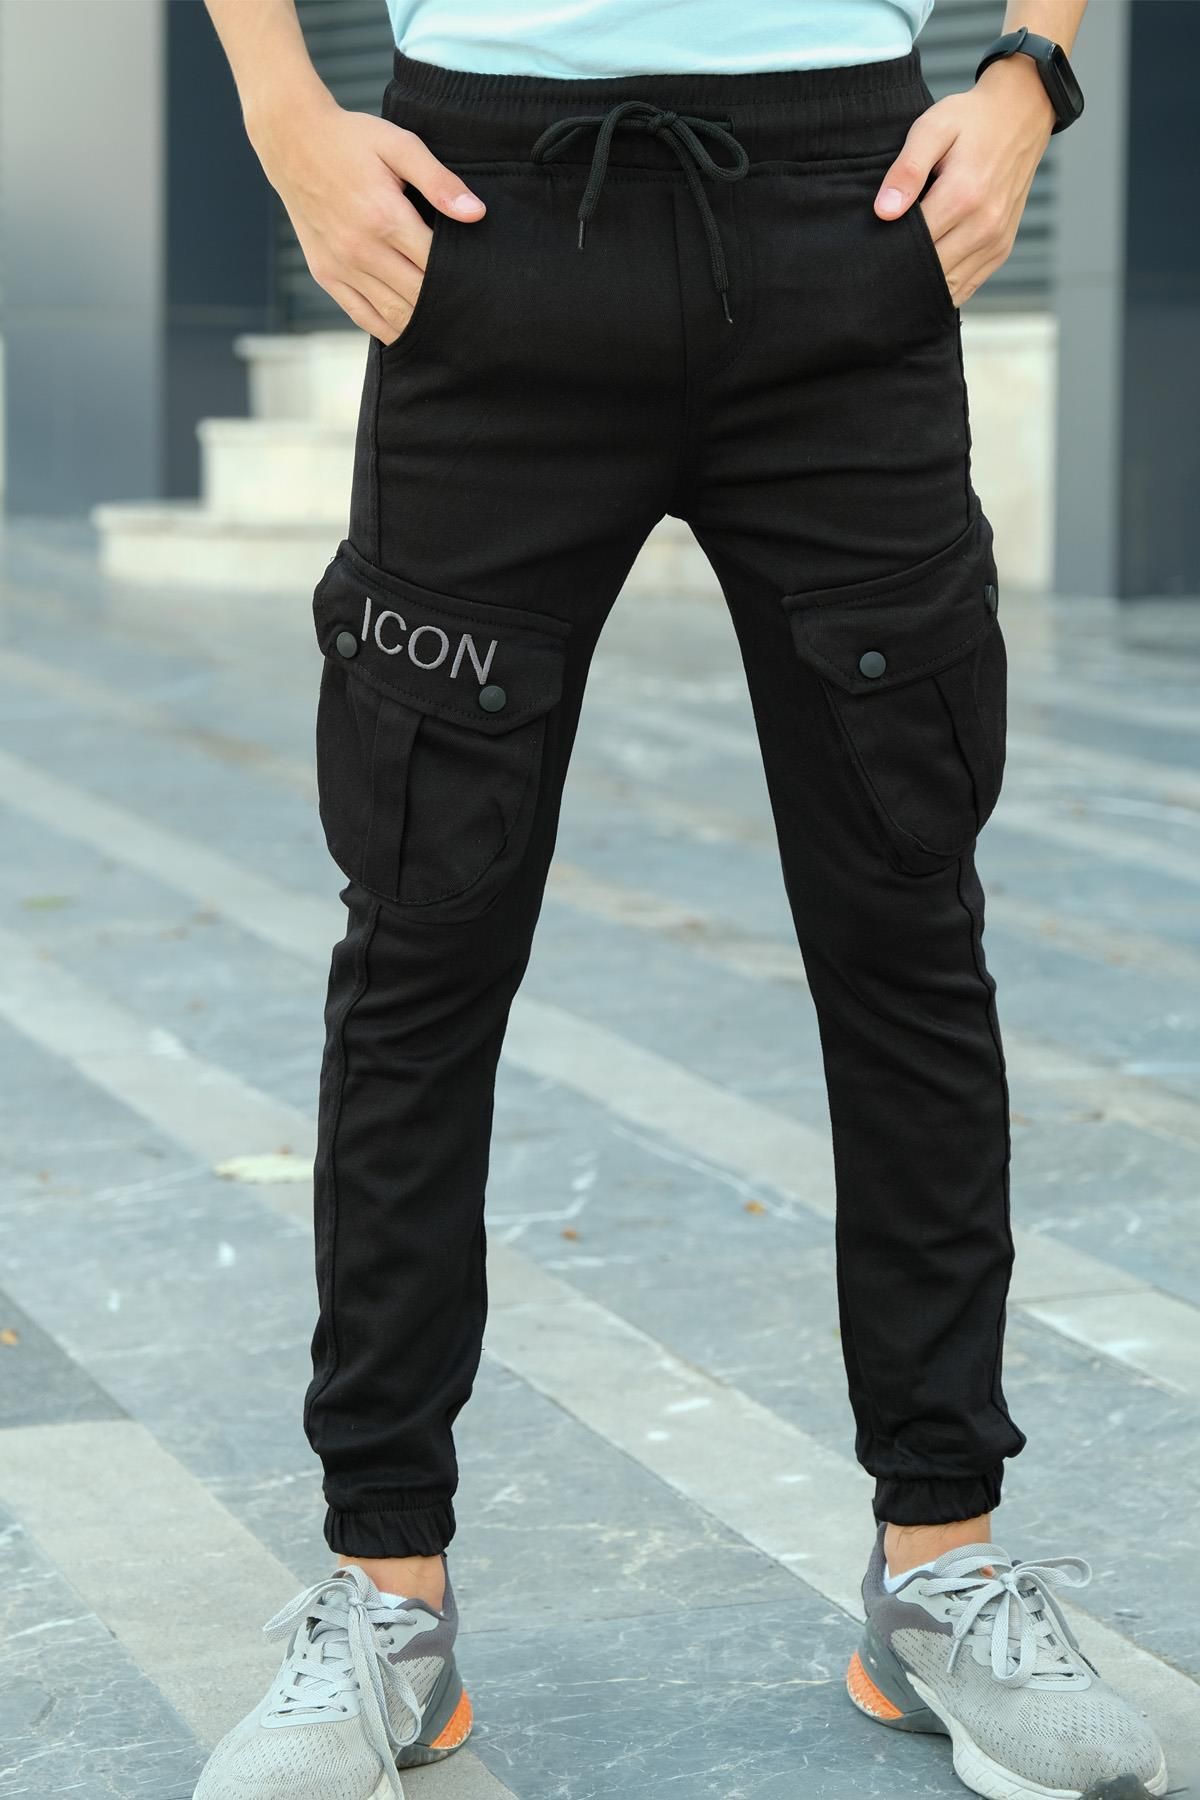 hoodie and track pants | Outfits for teenage guys, Cool outfits for teenage  guys, Hoodie outfit